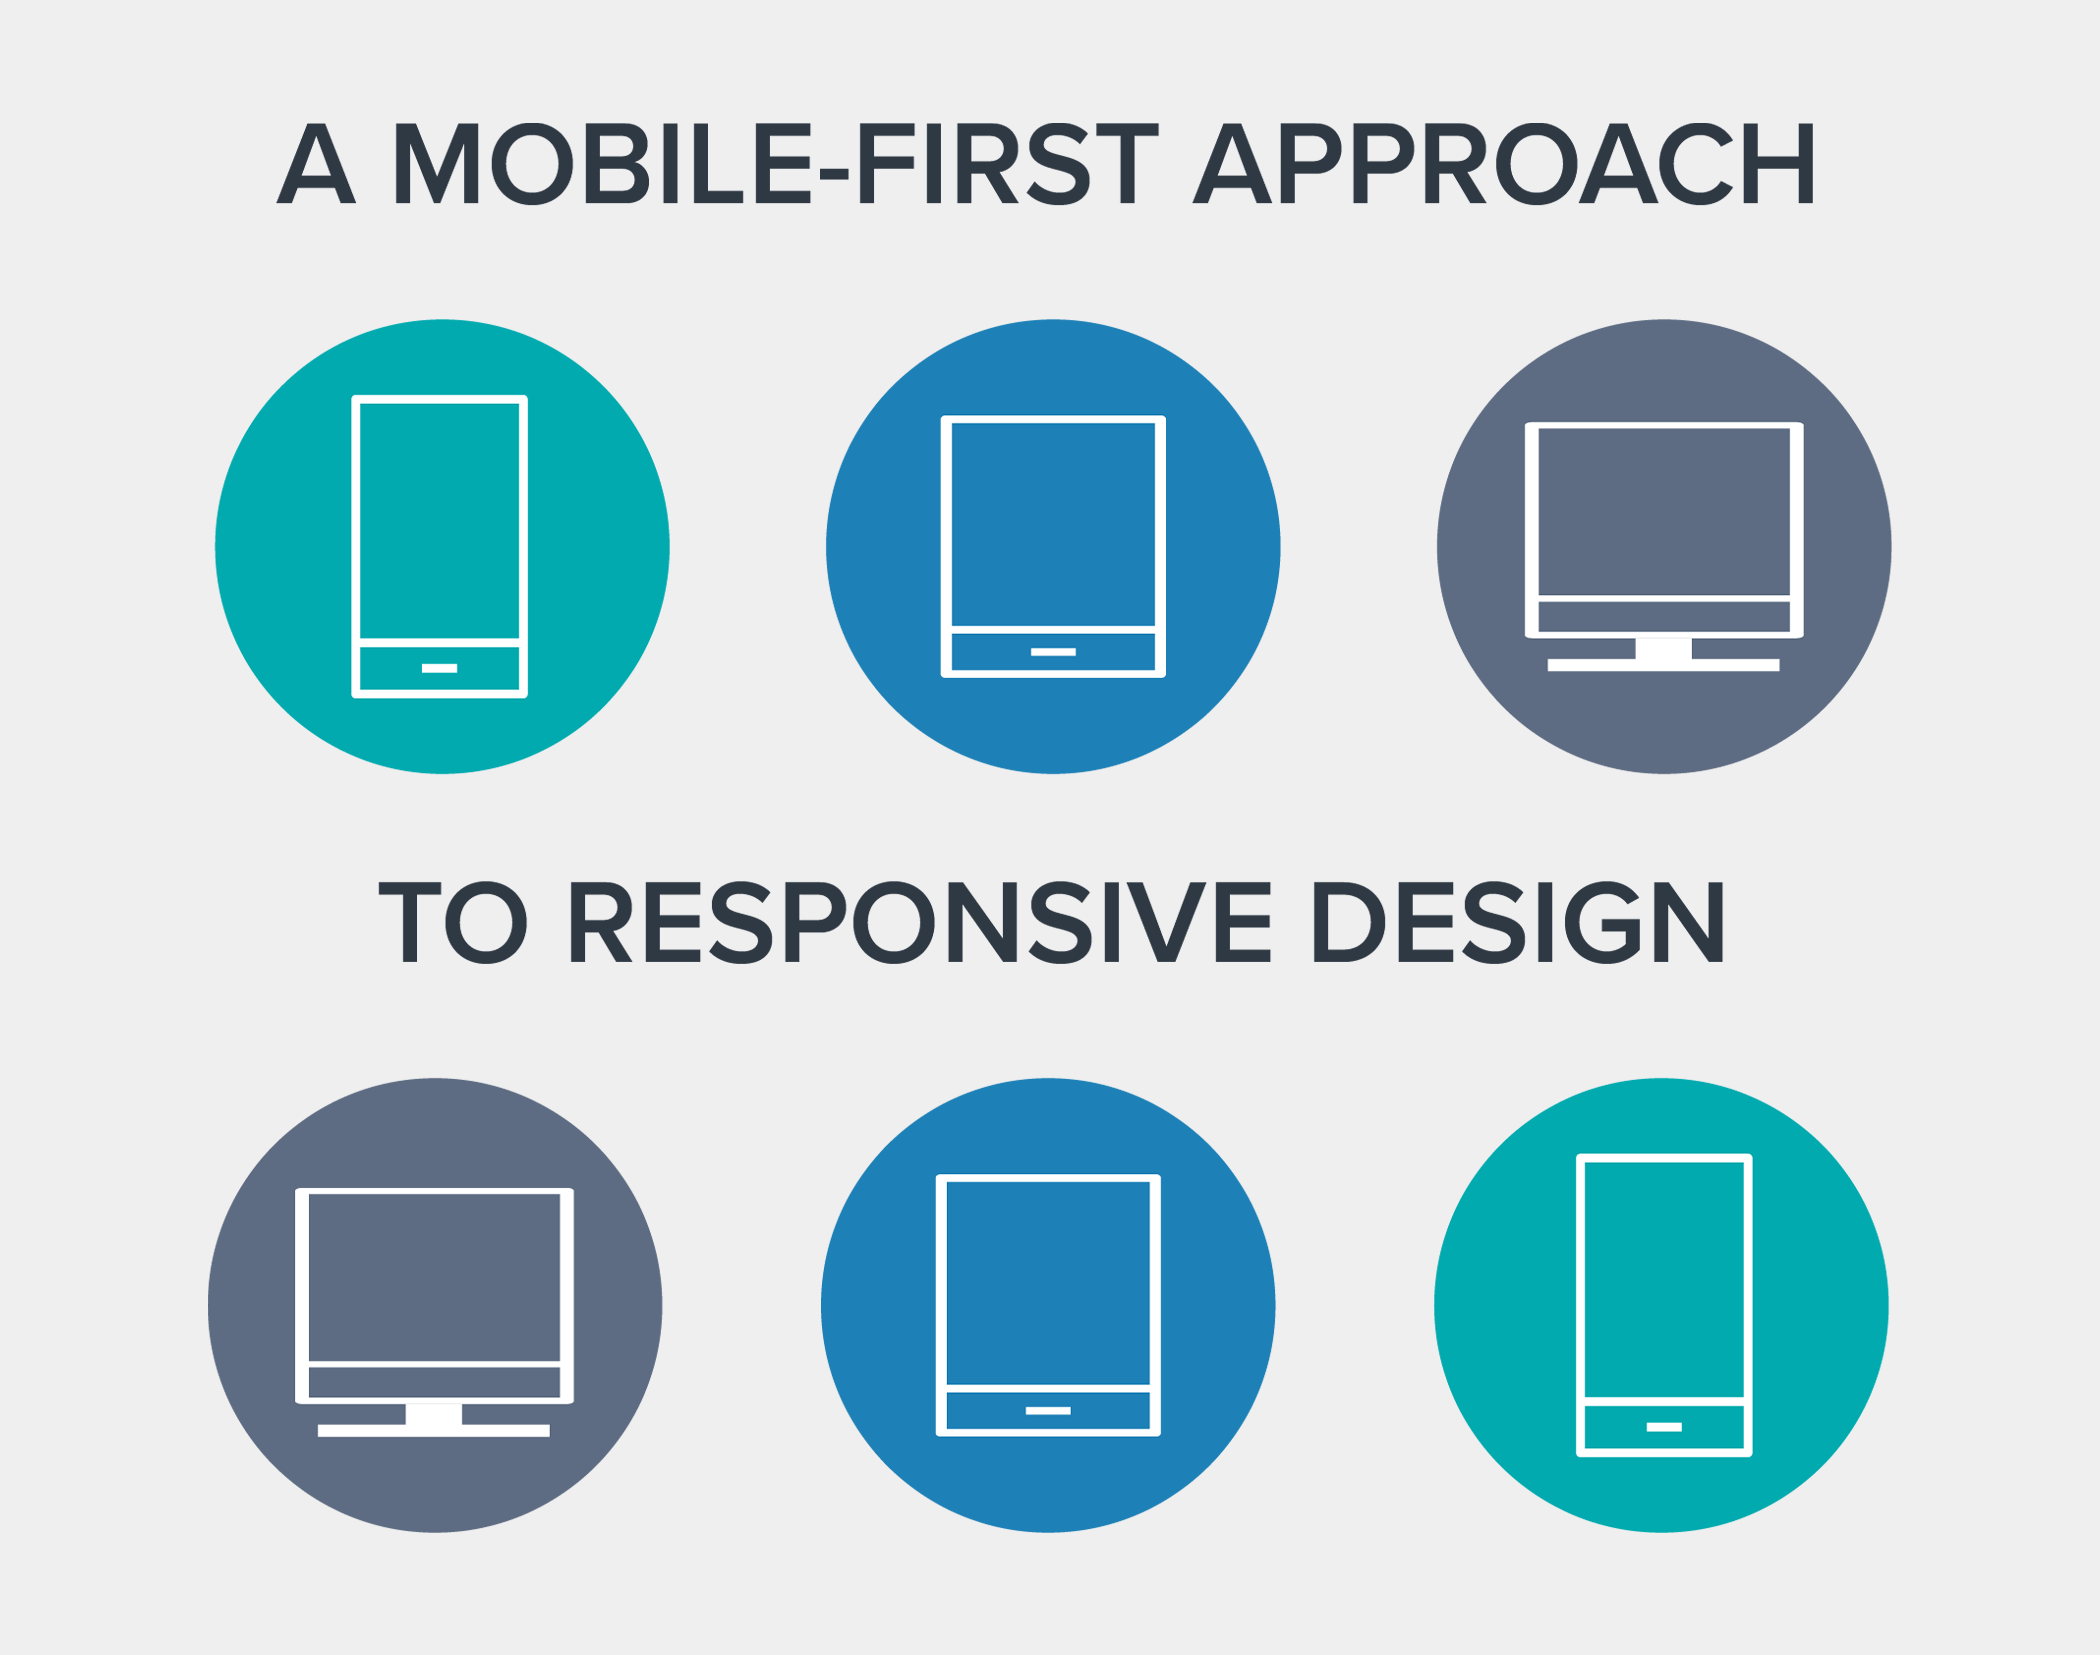 A Mobile-First Approach to Responsive Design